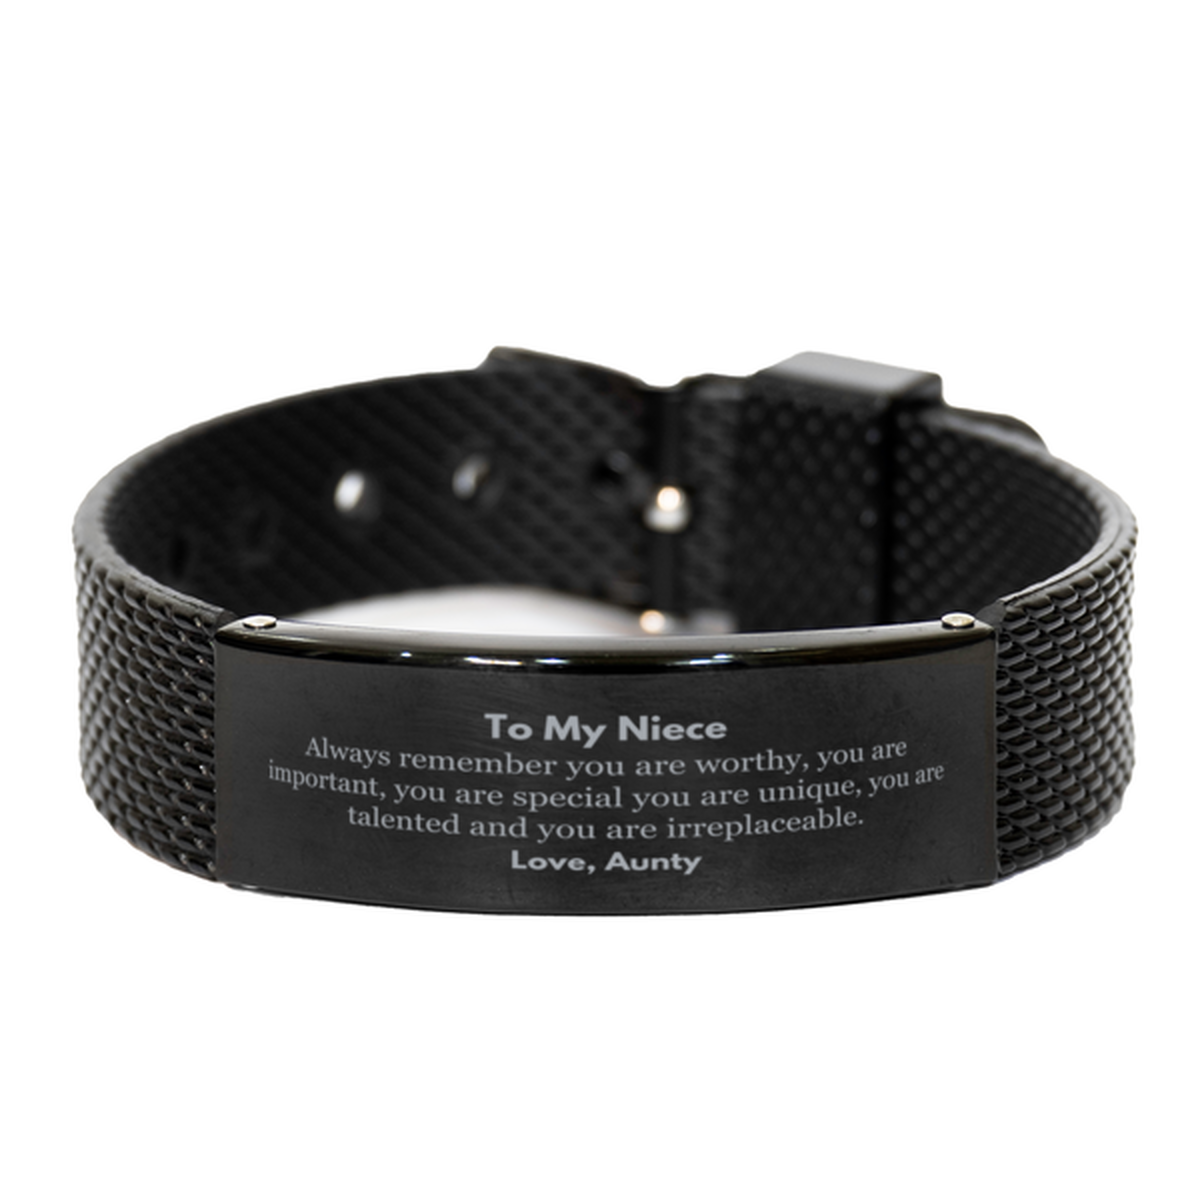 Niece Birthday Gifts from Aunty, Inspirational Black Shark Mesh Bracelet for Niece Christmas Graduation Gifts for Niece Always remember you are worthy, you are important. Love, Aunty